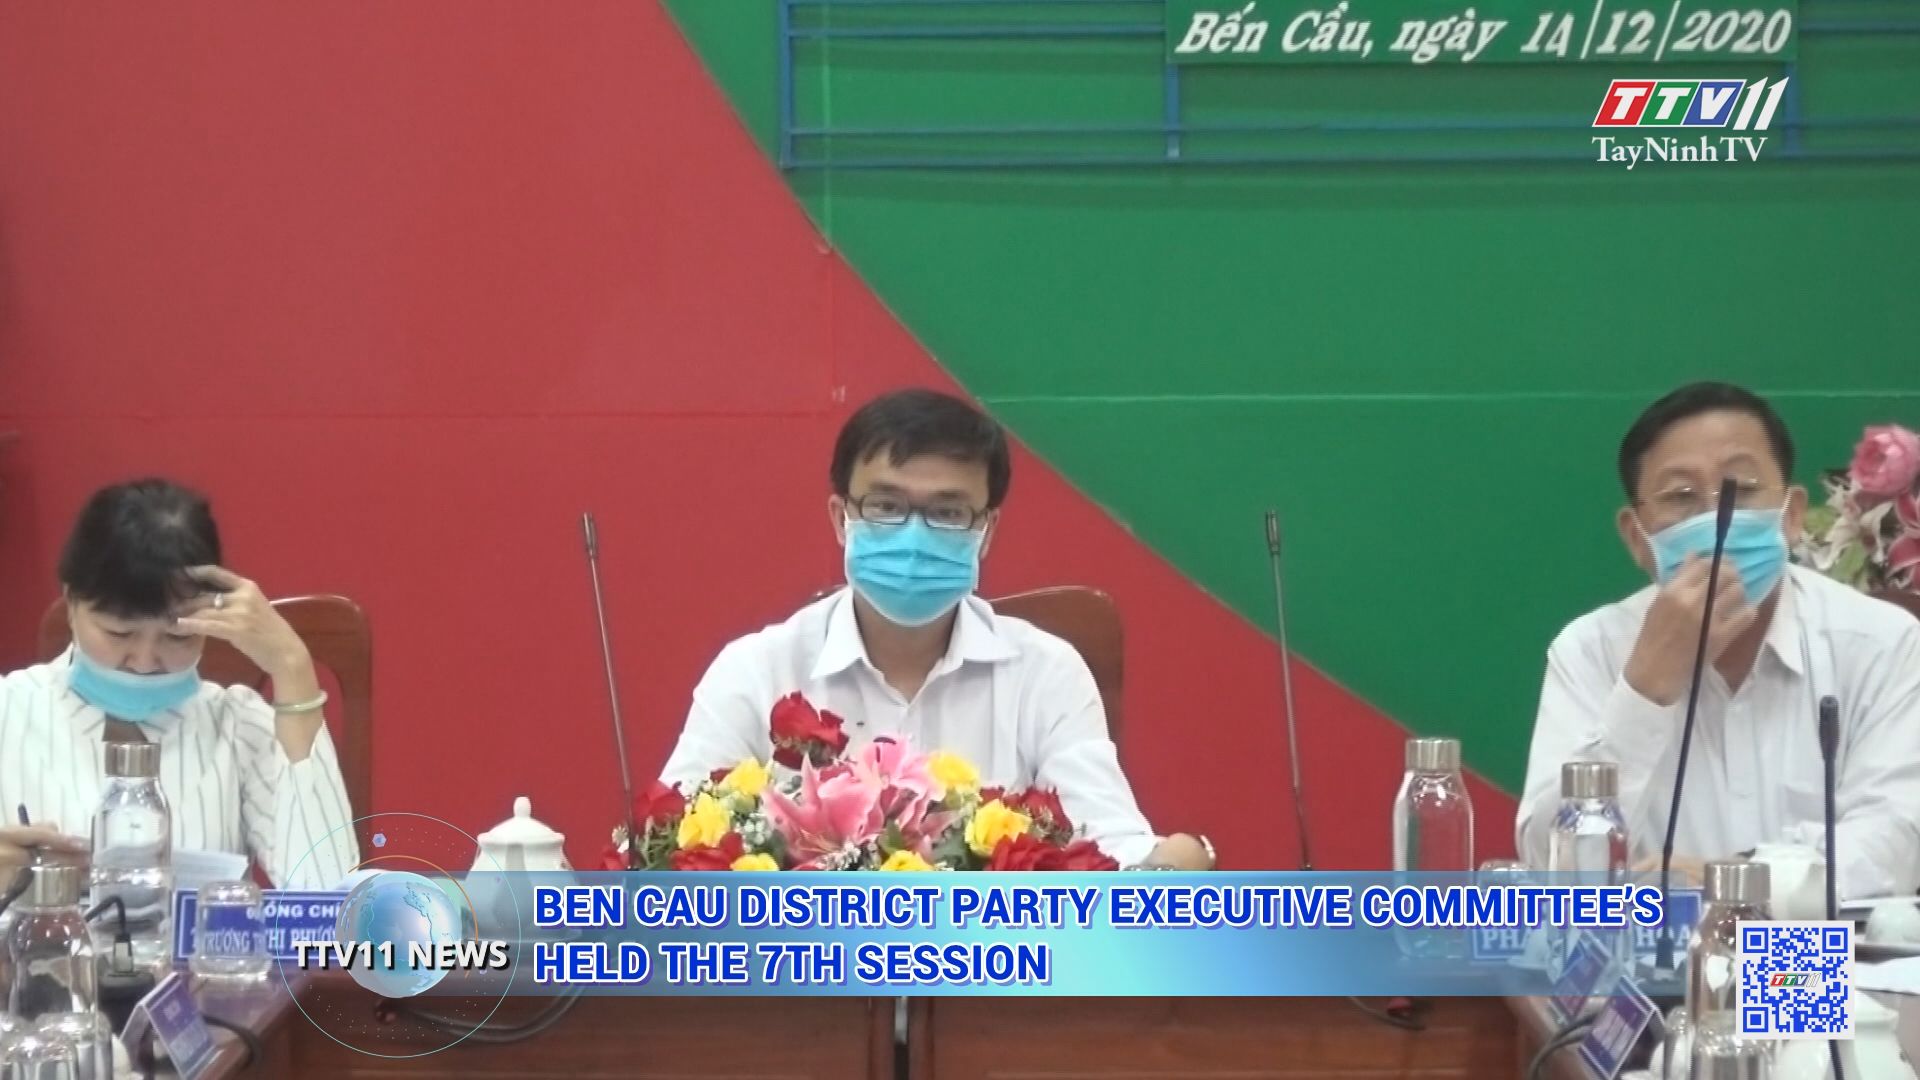 Ben Cau district party executive committees held the 7th session | TTVNEWS | TayNinhTV Today 